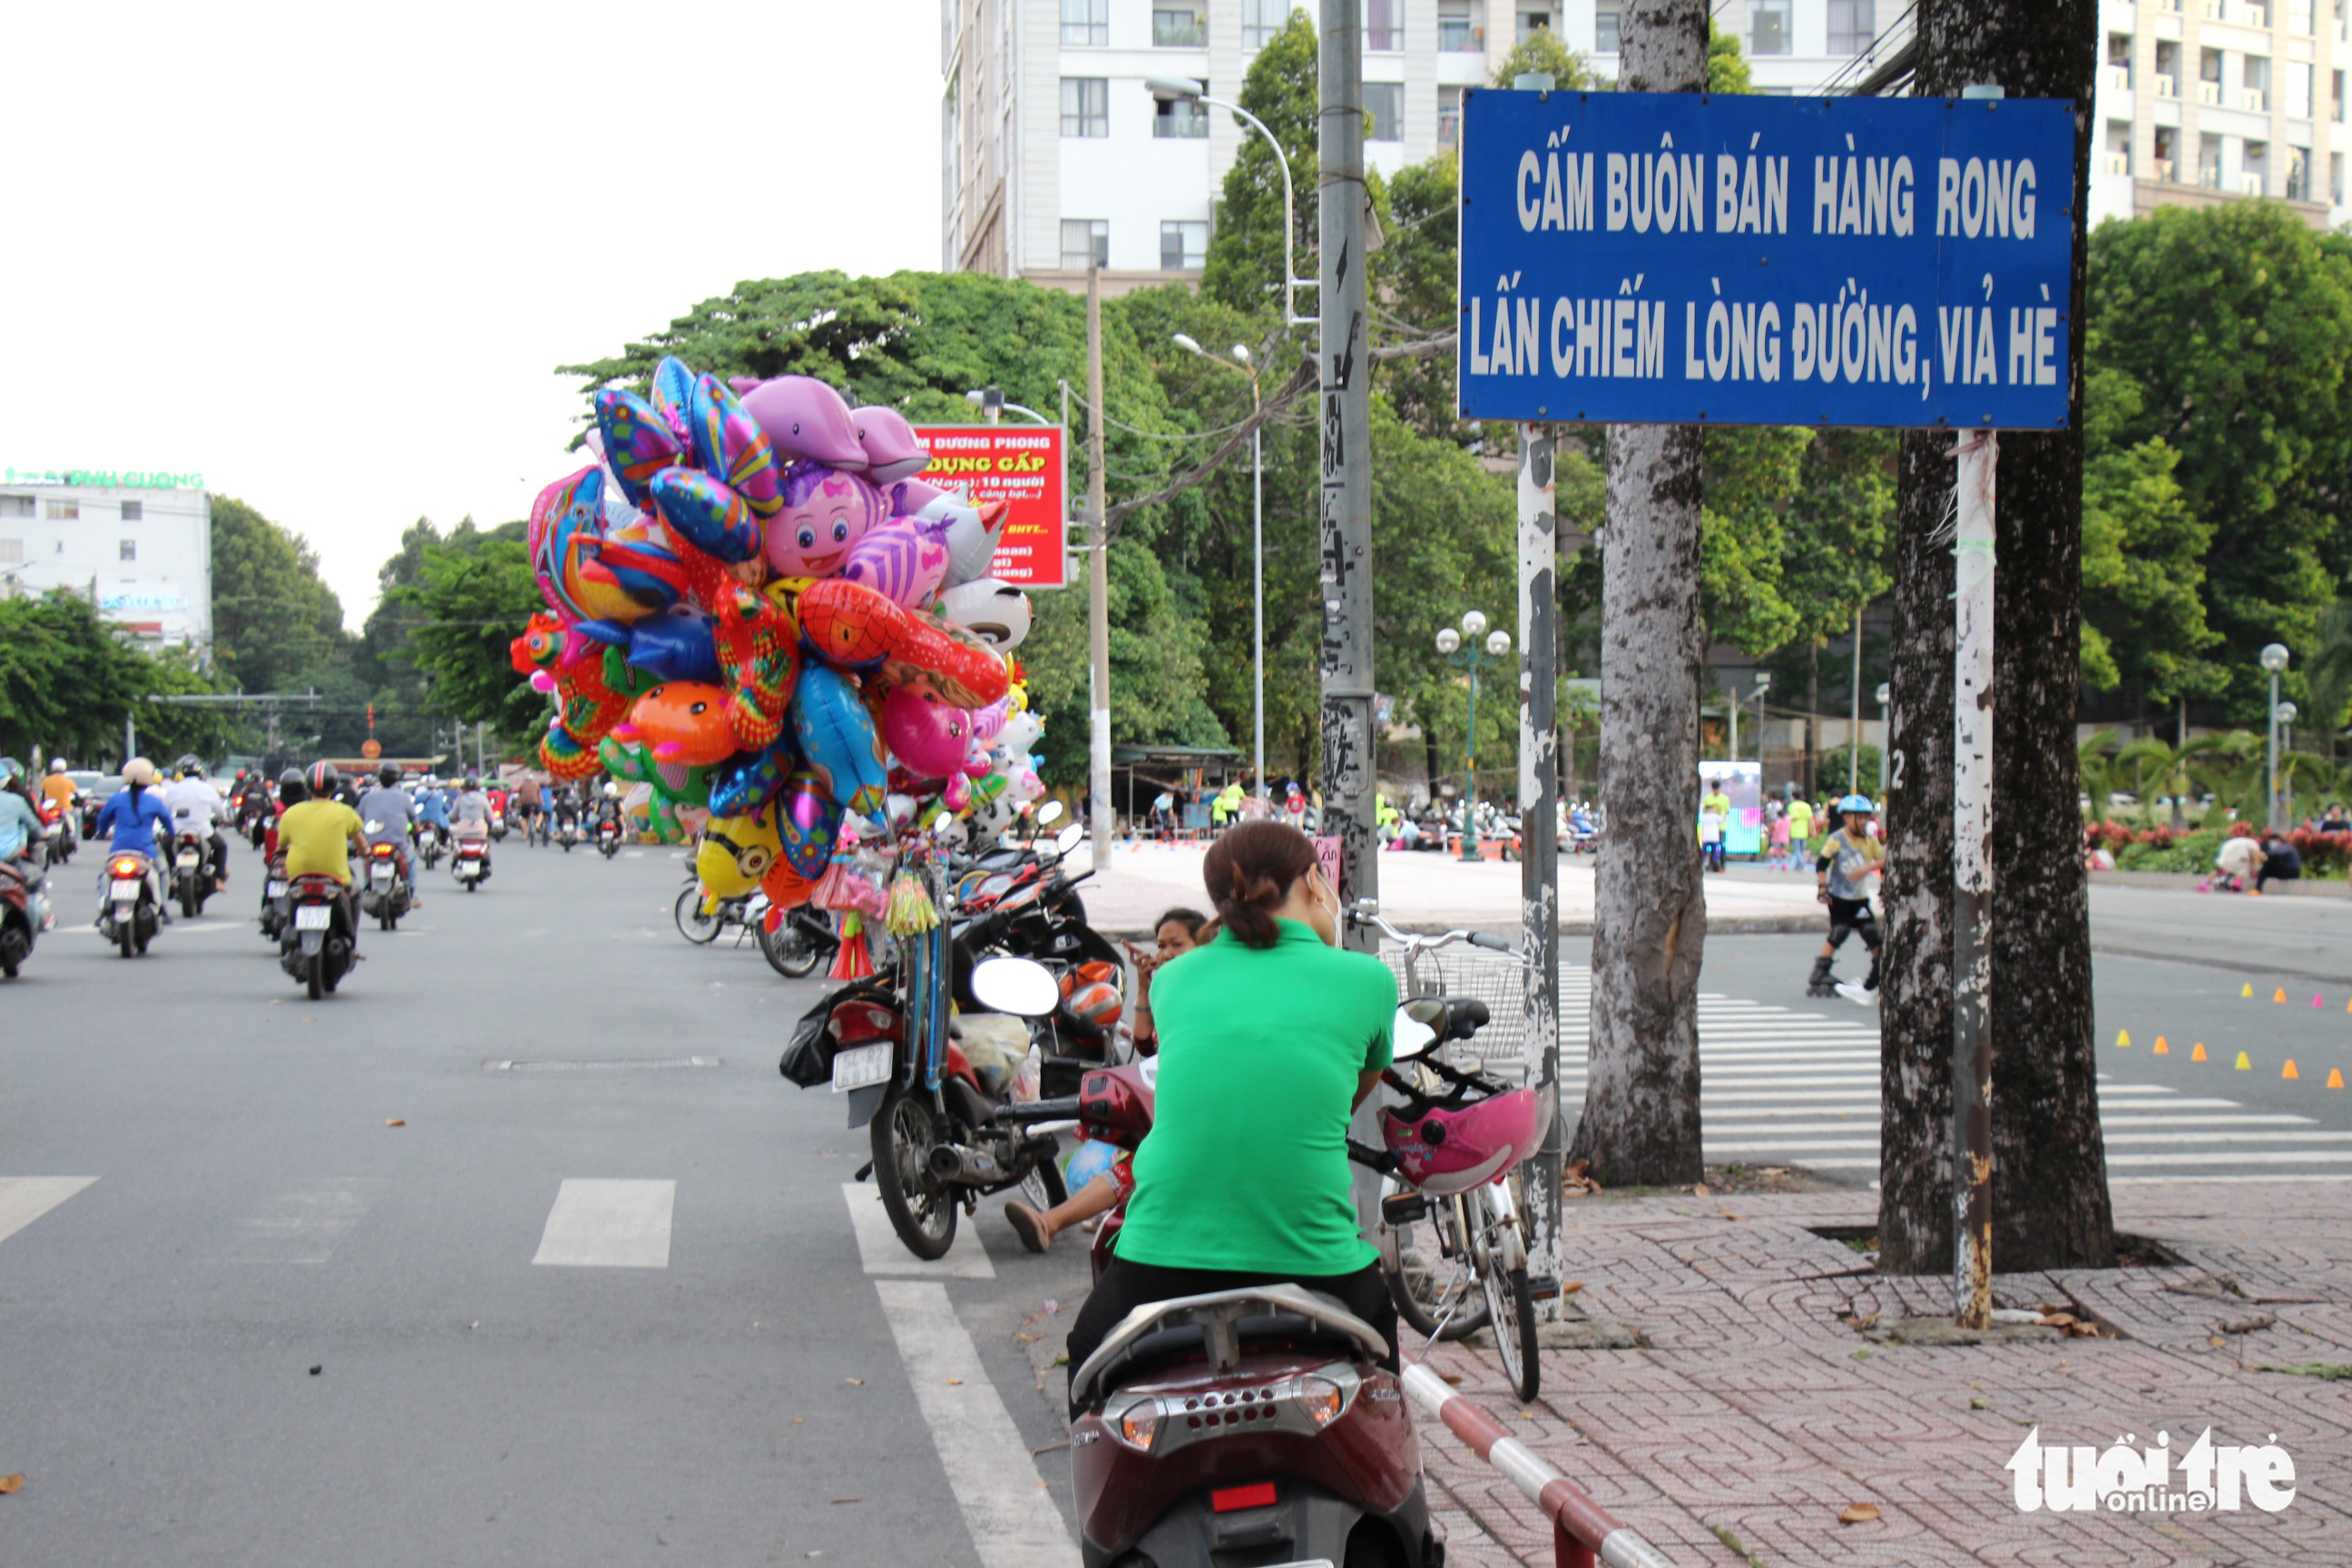 A balloon street vendor and a woman illegally park their motorbikes on Hoang Minh Giam Street in Phu Nhuan District, Ho Chi Minh City. Photo: Phuong Quyen / Tuoi Tre